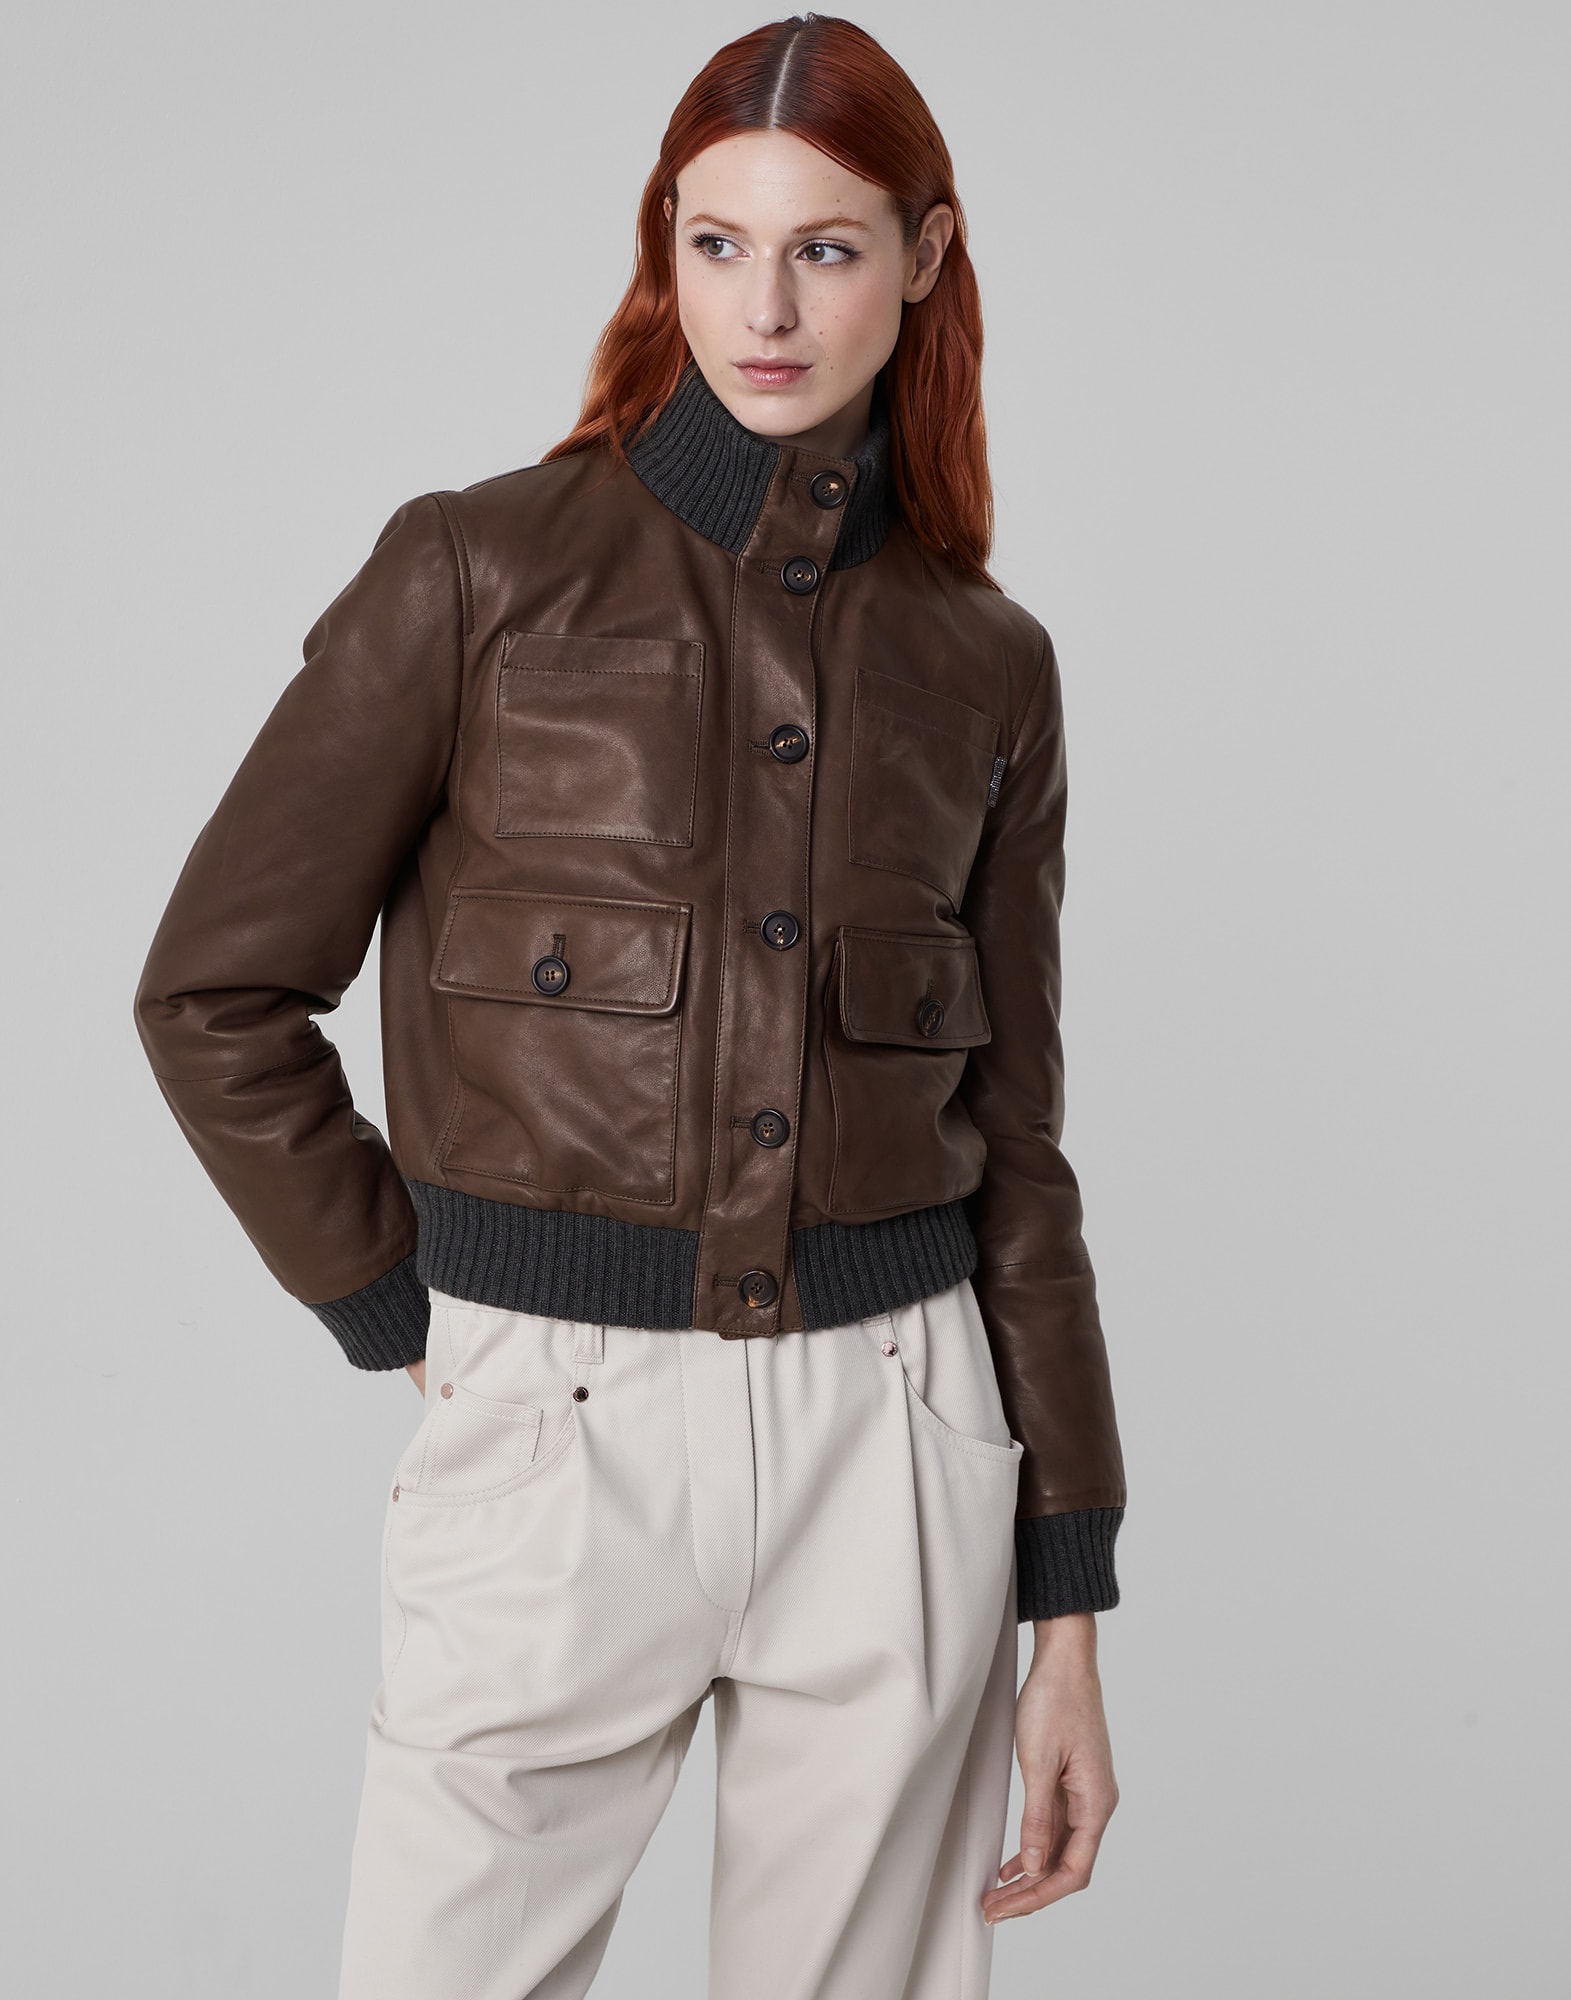 Nappa leather outerwear